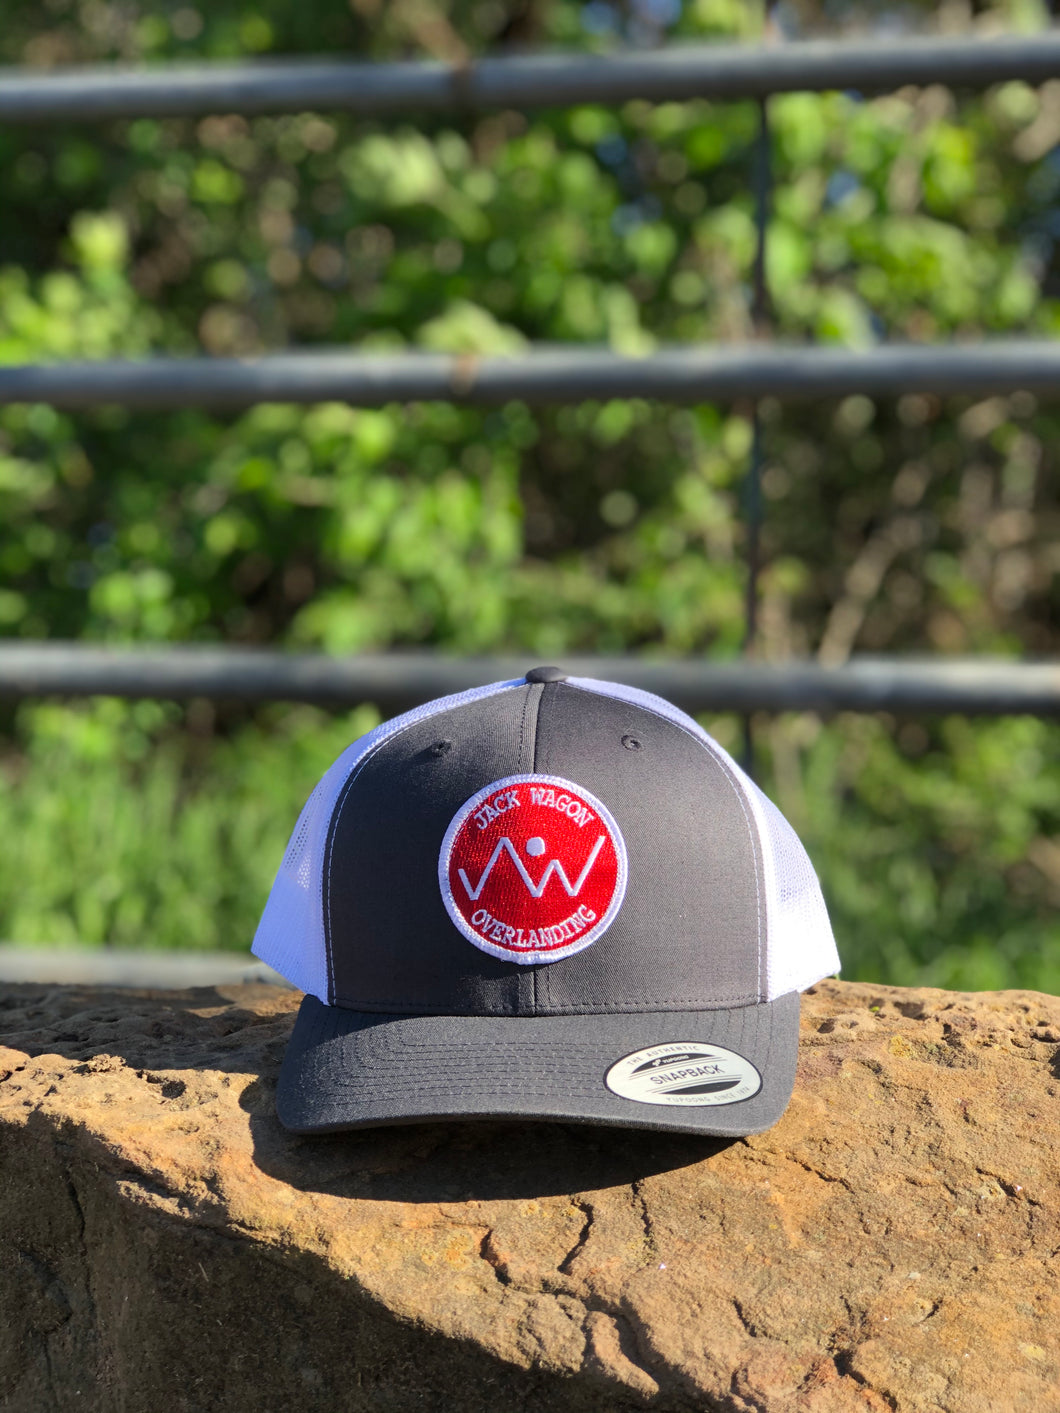 Jack Wagon Overlanding red mountain logo patch hat